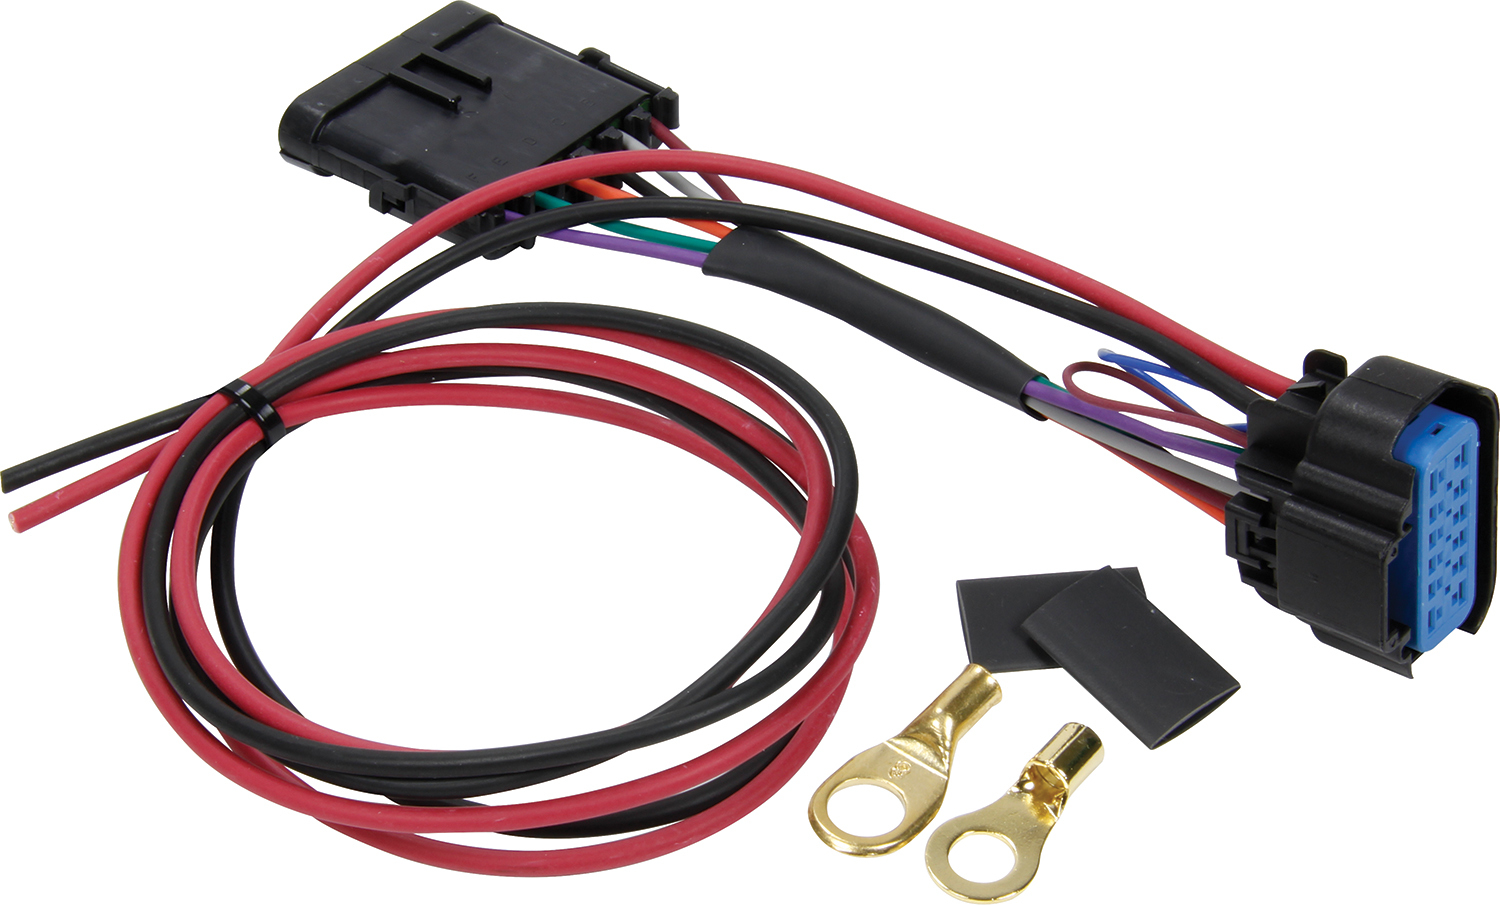 QuickCar 50-2006 Ignition Wiring Harness, Weatherpack, MSD Digital 6 Ignition Box, Each